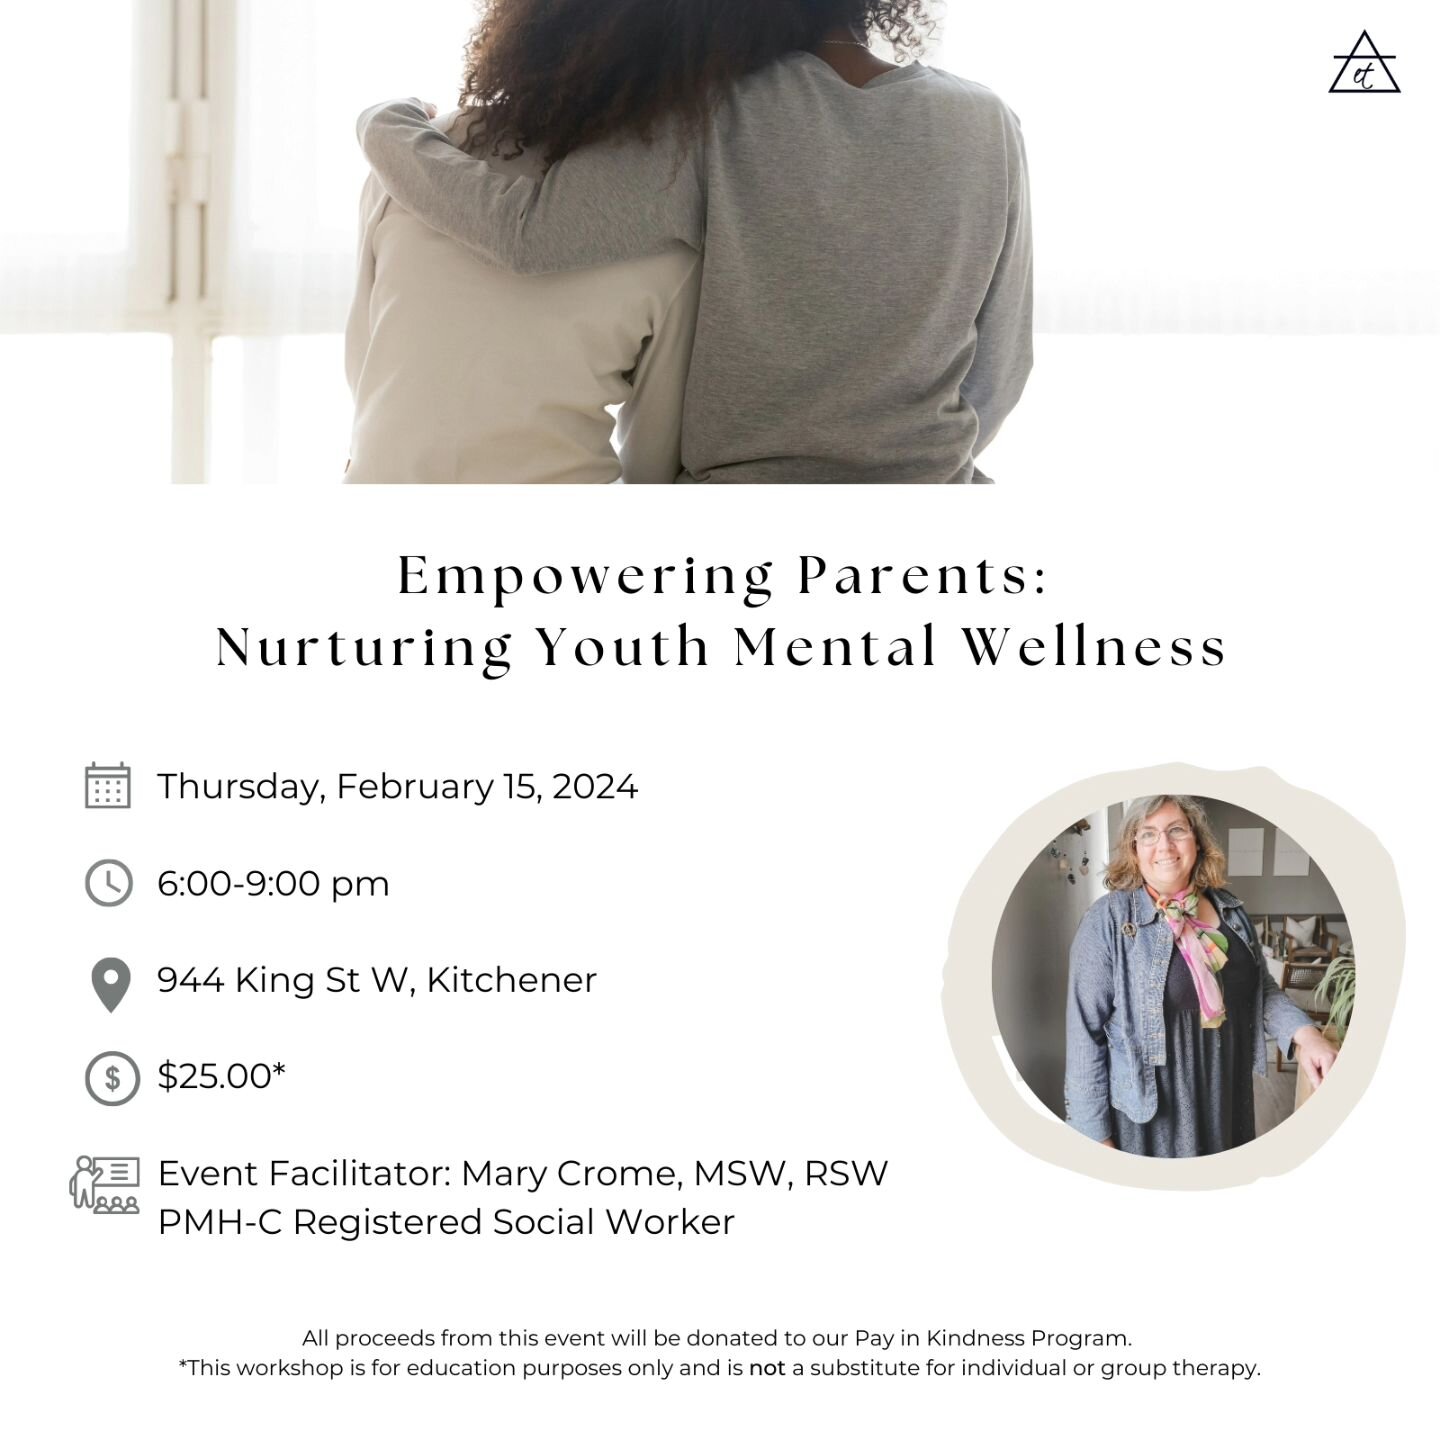 UPCOMING WORKSHOP!
.
Hosted by Mary Crome, Registered Social Worker, this interactive workshop is designed to empower parents, guardians, and caregivers in effectively supporting youth mental health. 
.
Gain practical tools and insights to create a n